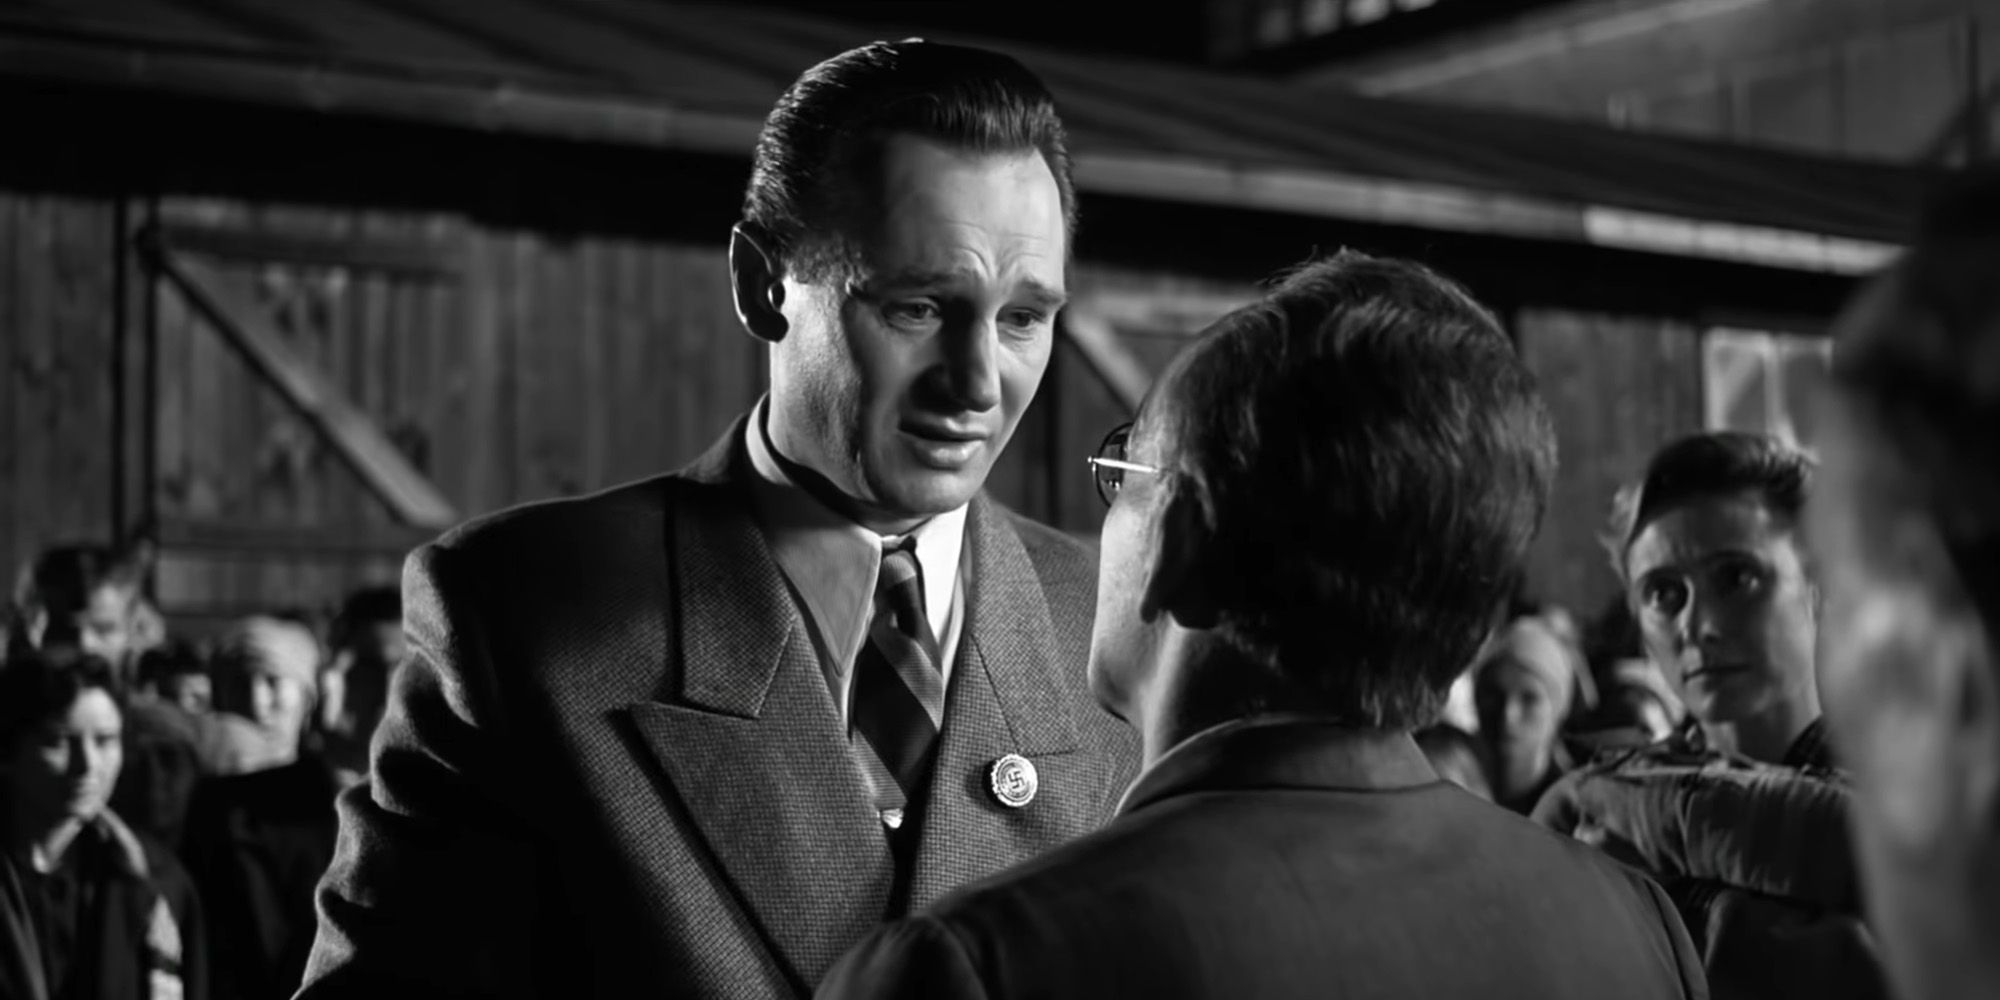 Liam Neeson as Oskar Schindler crying while facing a man in Schindler's List